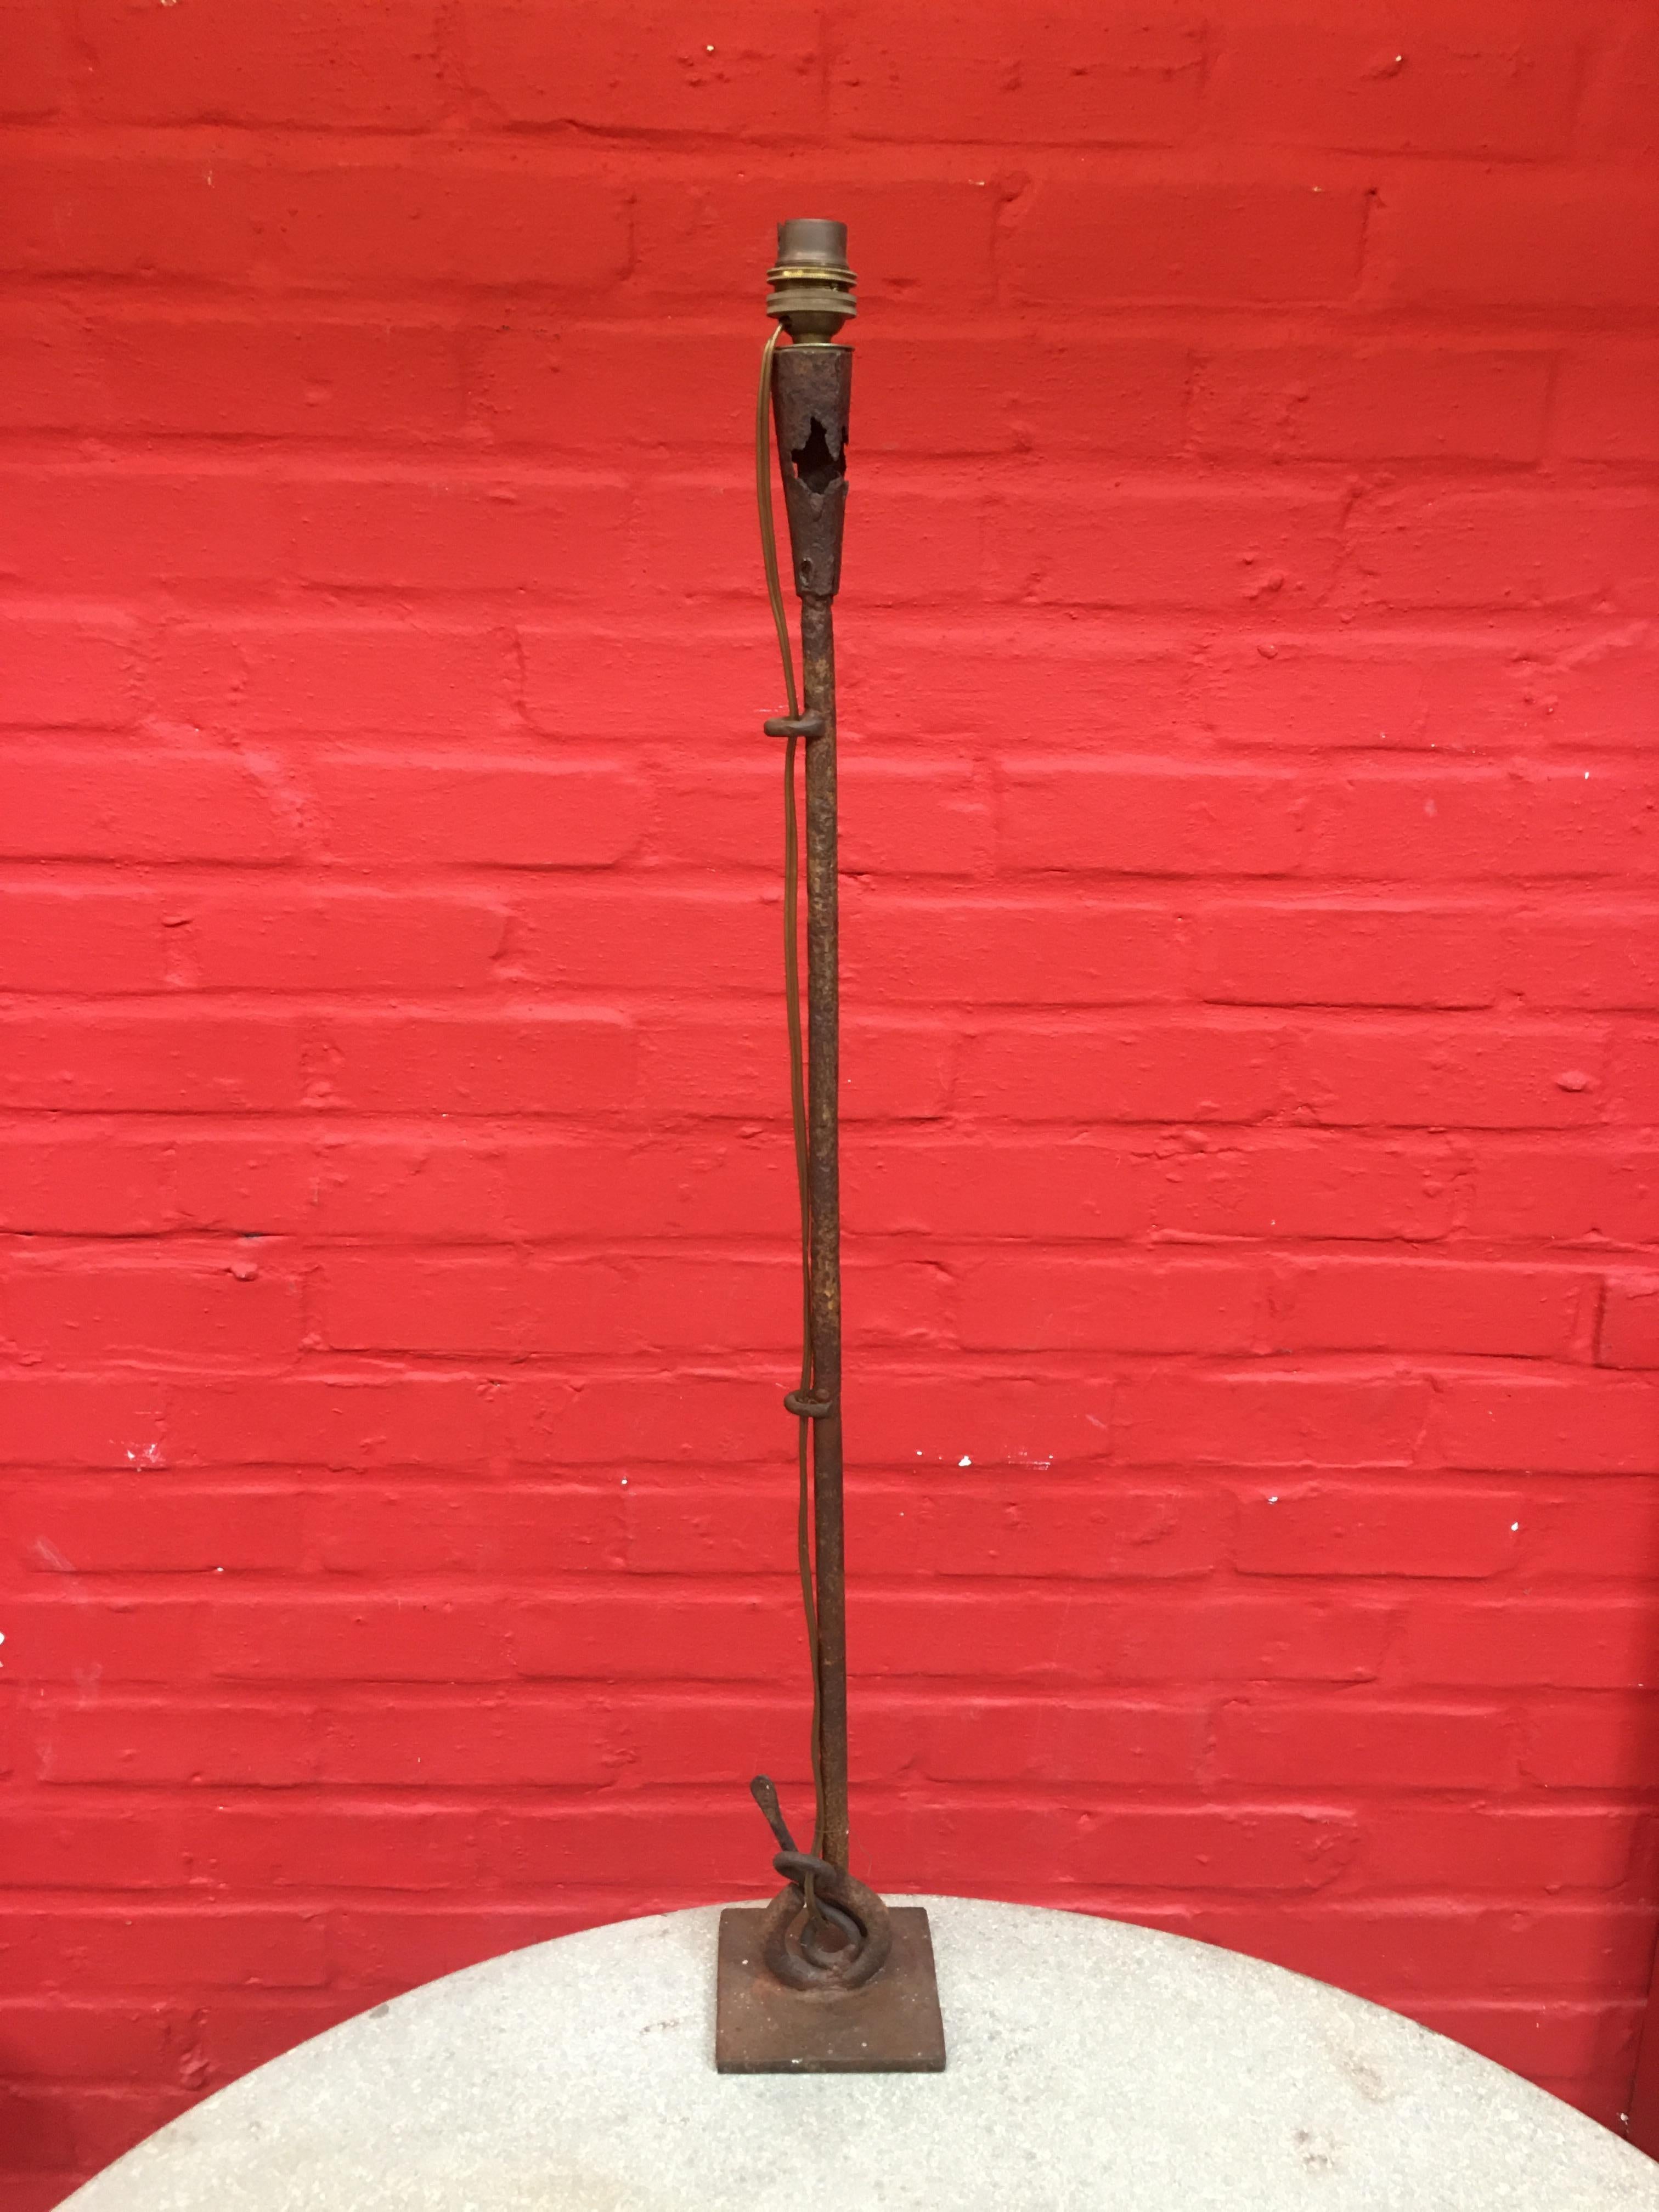 Guylaine Guy (1929) wrought iron sculpture lamp circa 1970
the lampshade has been added, it is old (early 20th century) and is in good condition, but with faults

Guylaine Guy, whose real name is Guylaine Chailler, is a Quebec singer and painter